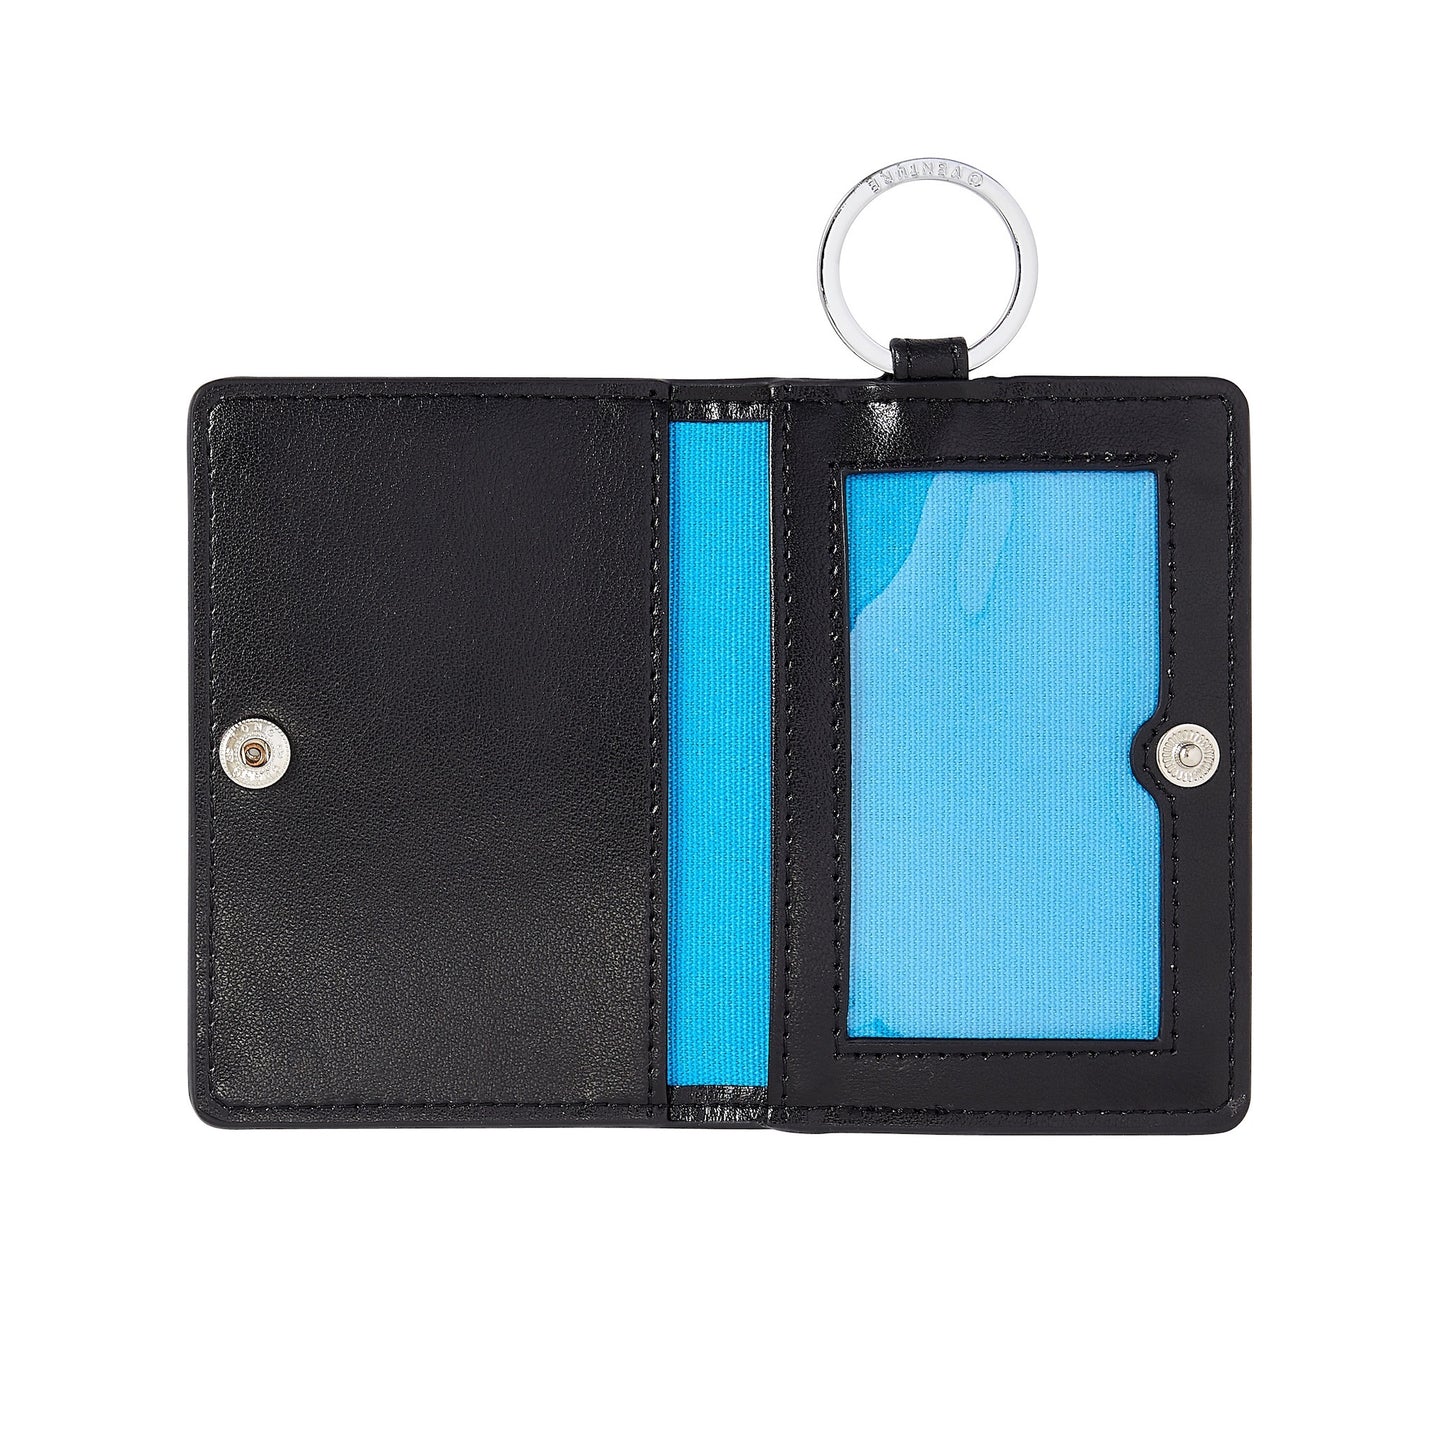 Black wallet keychain by Oventure. This wallet keychain has a split ring attached to make it a key card holder. The Black leather id case with clear window on the back.